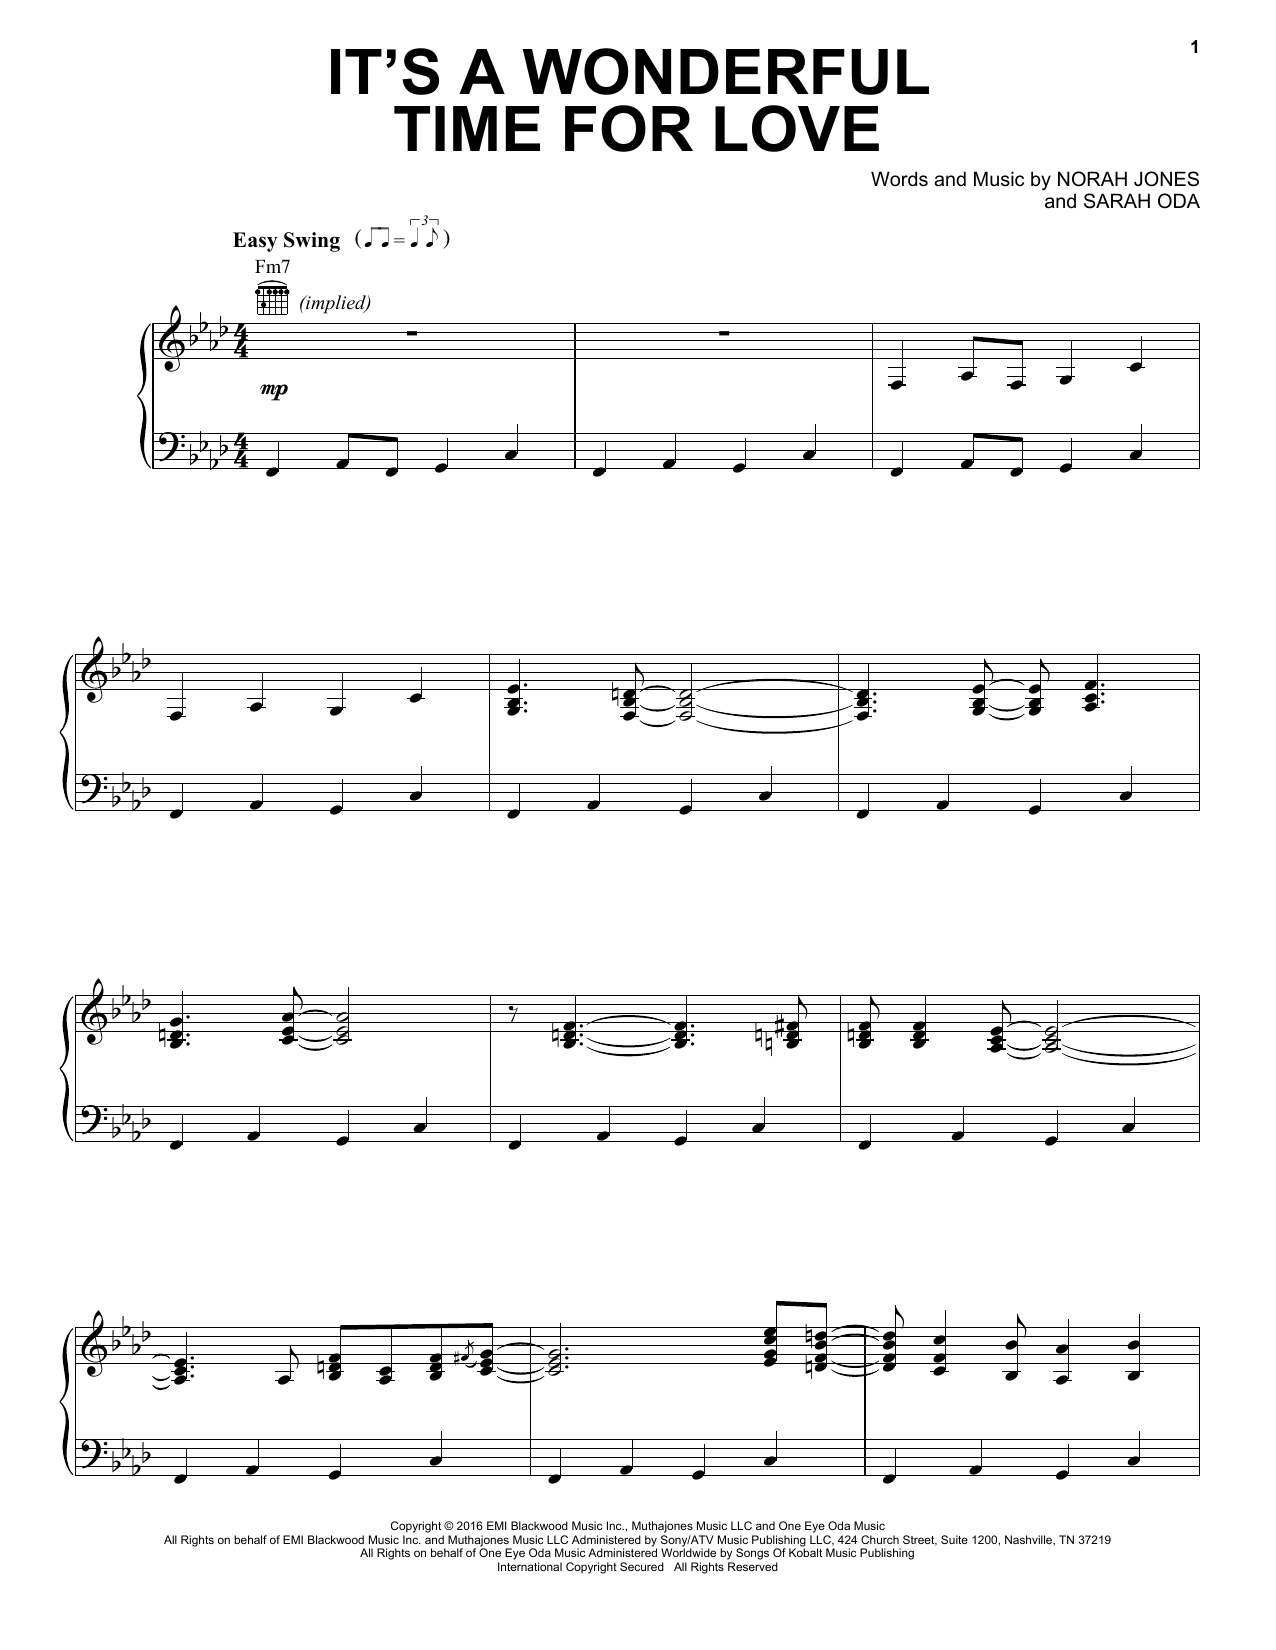 Download Norah Jones It's A Wonderful Time For Love Sheet Music